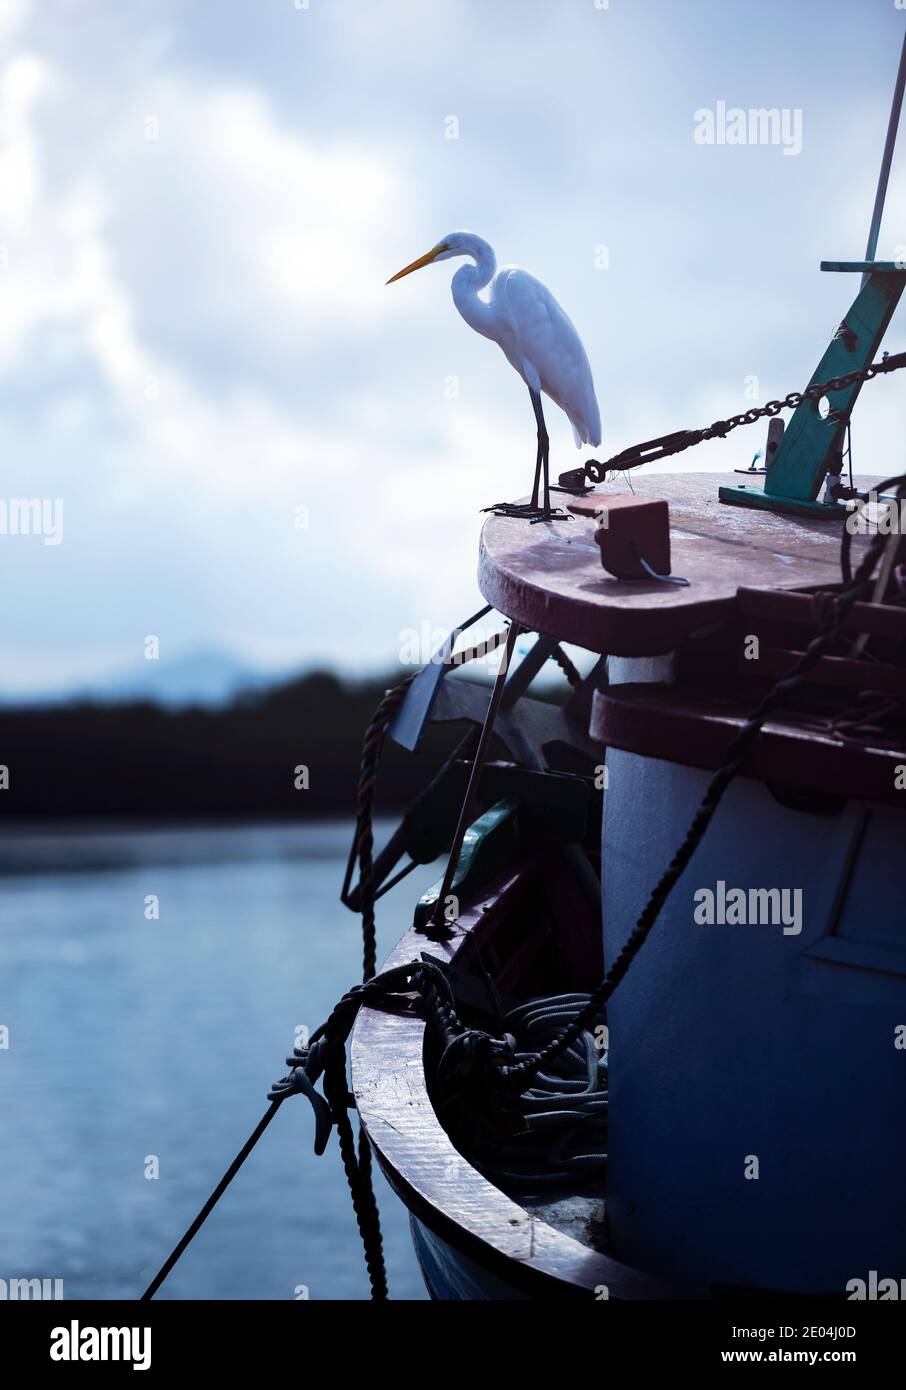 Great egret standing on the bow of a boat. Stock Photo